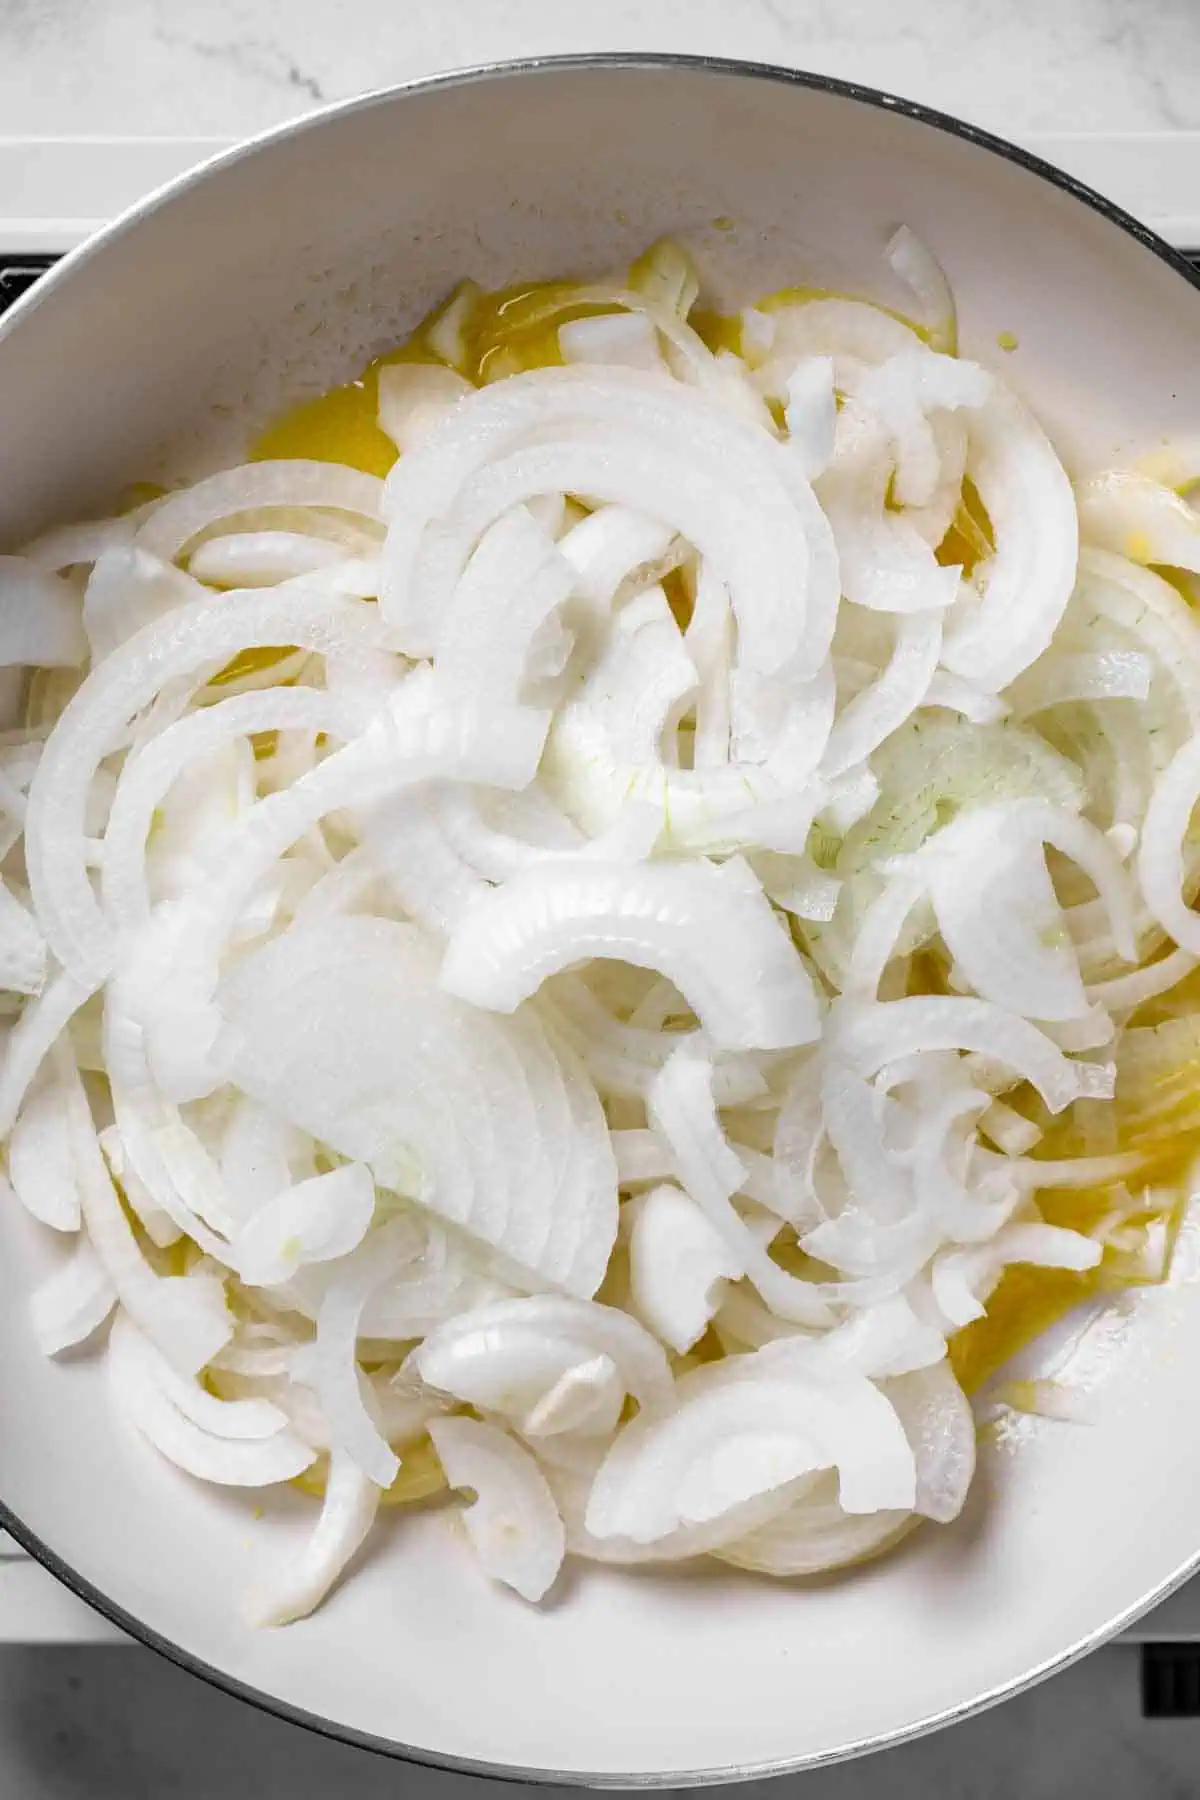 Raw onions in a pan with melted butter.